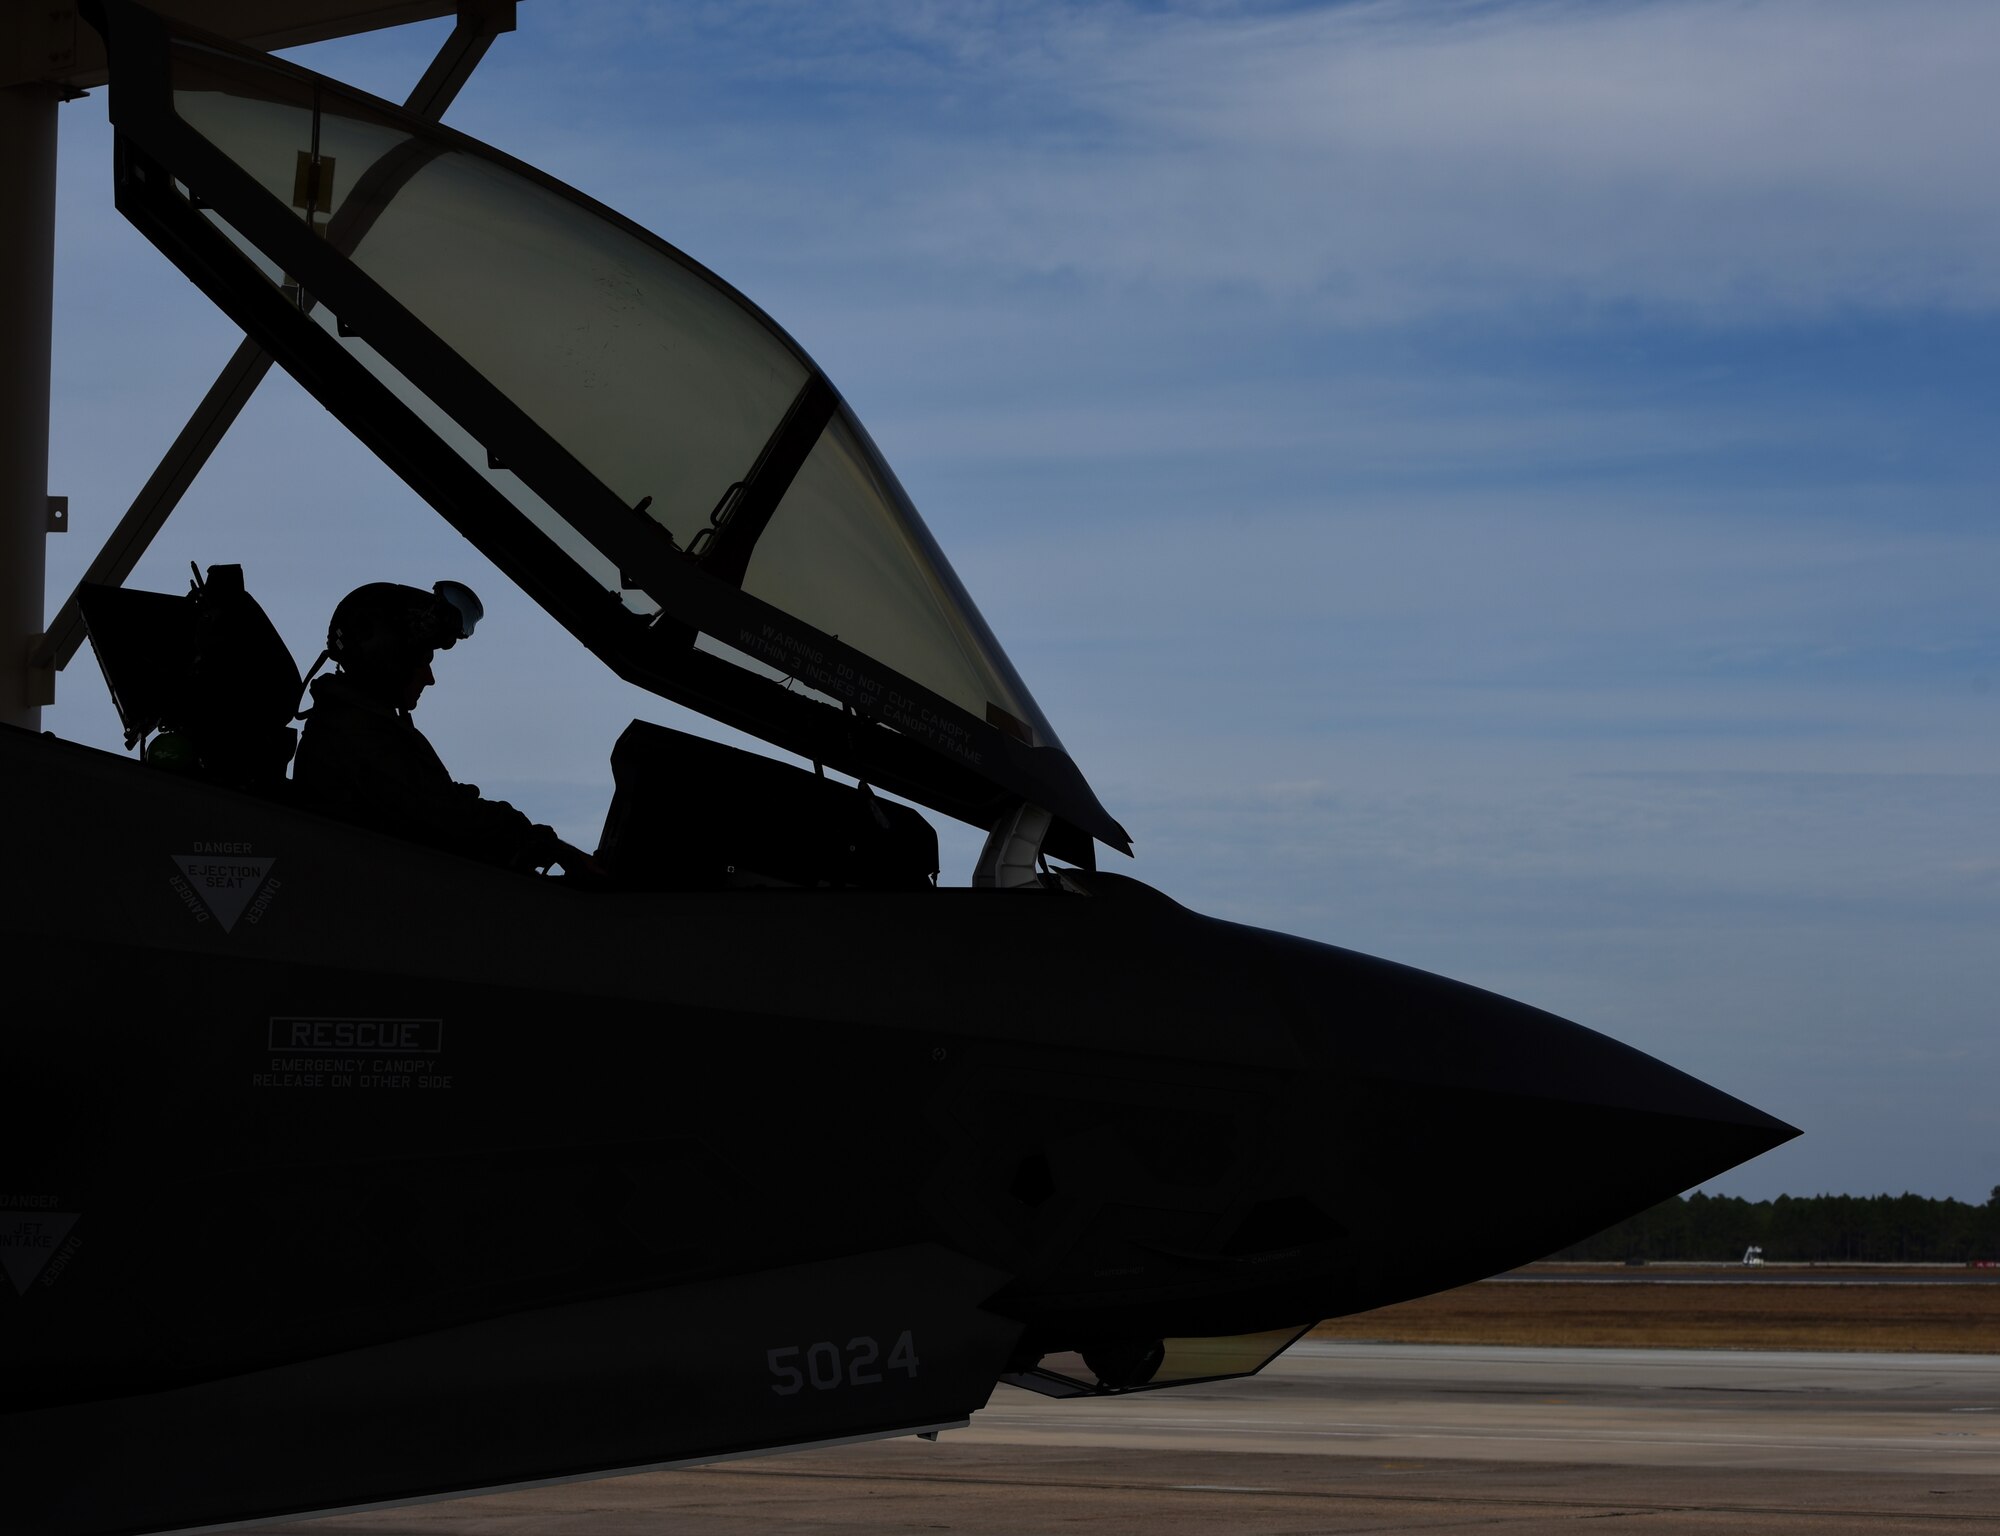 U.S. Air Force Lt. Col. Jon Snyder, 58th Fighter Squadron director of operations, sits in the cockpit of an F-35A Lightning II before takeoff Dec. 8, 2016, at Tyndall Air Force Base, Florida.  The 33d Fighter Wing deployed six F-35A Lightning II and 95 personnel to Checkered Flag 17-1. Checkered Flag is a combat rehearsal where 15 aircraft platforms take to the skies to fly realistic and large-scale operations to prepare for contingency operations.  Specifically, this exercise tested the range of capabilities for the F-35A and the 33 FW student and instructor pilots, maintainers, air battle managers and intel by operating from two locations. (U.S. Air Force photo by Staff Sgt. Peter Thompson)